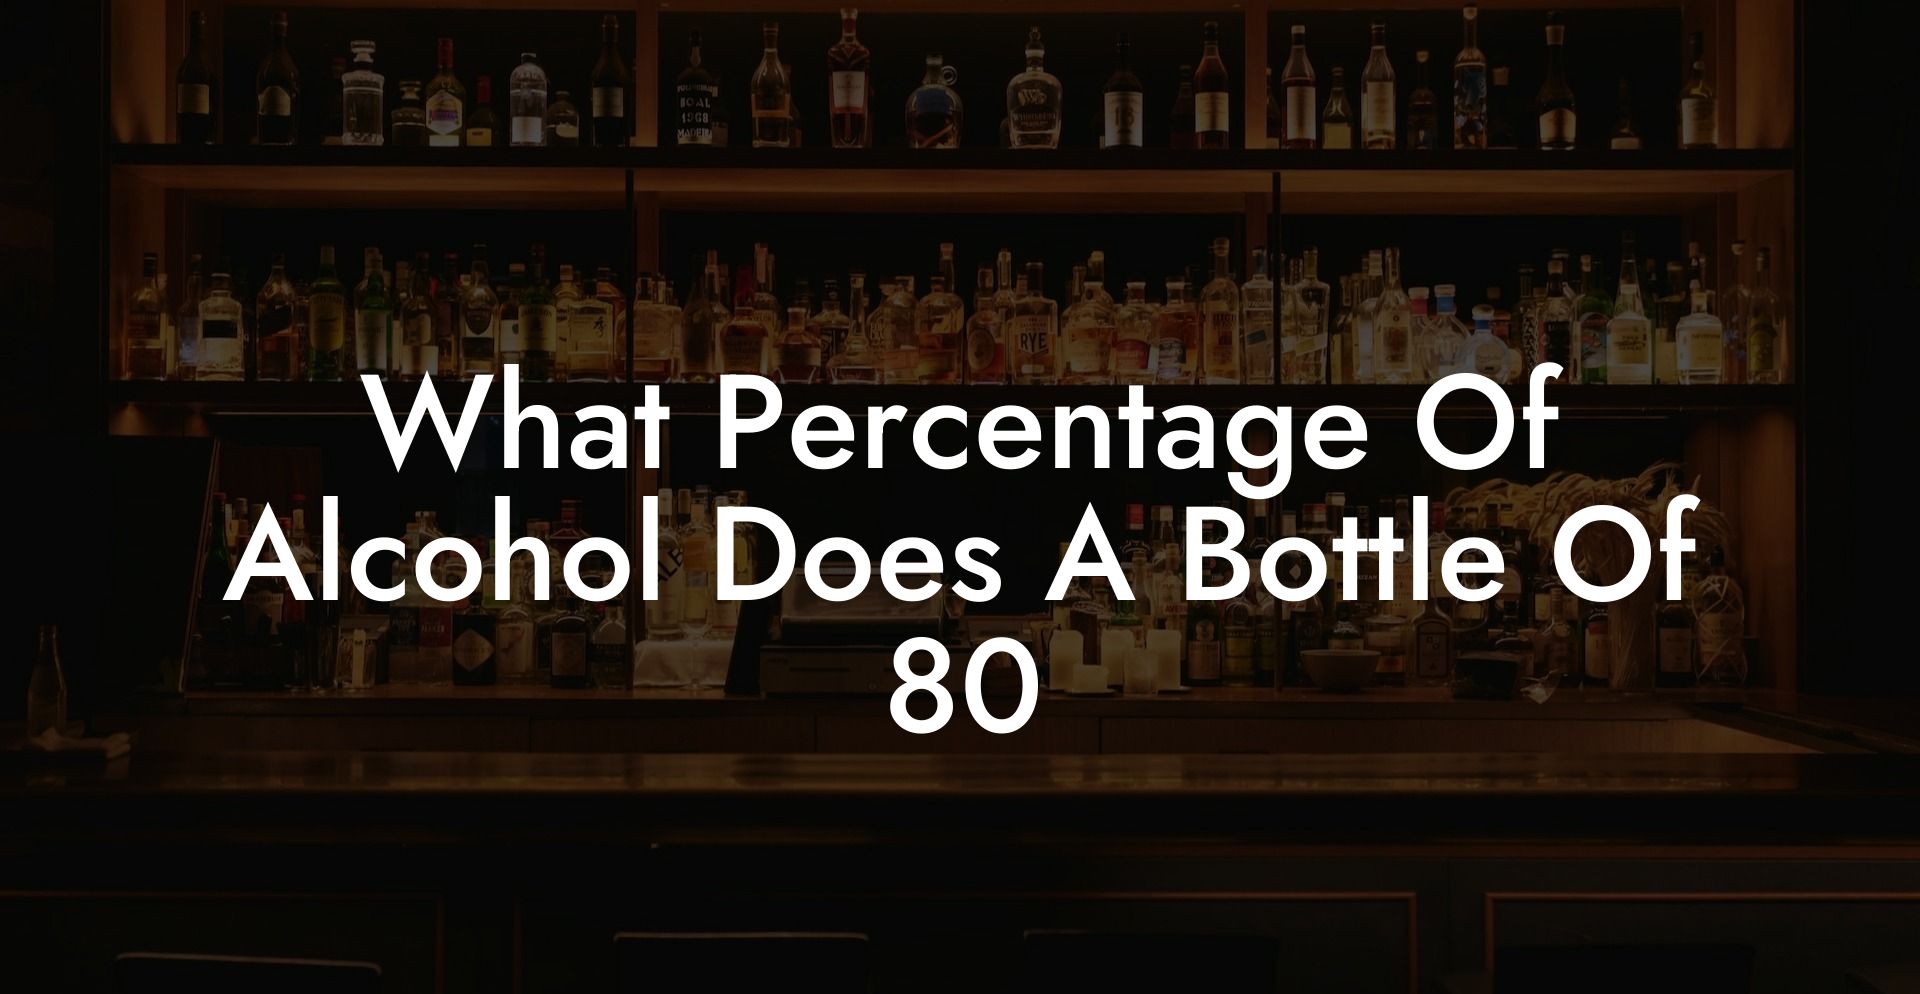 What Percentage Of Alcohol Does A Bottle Of 80